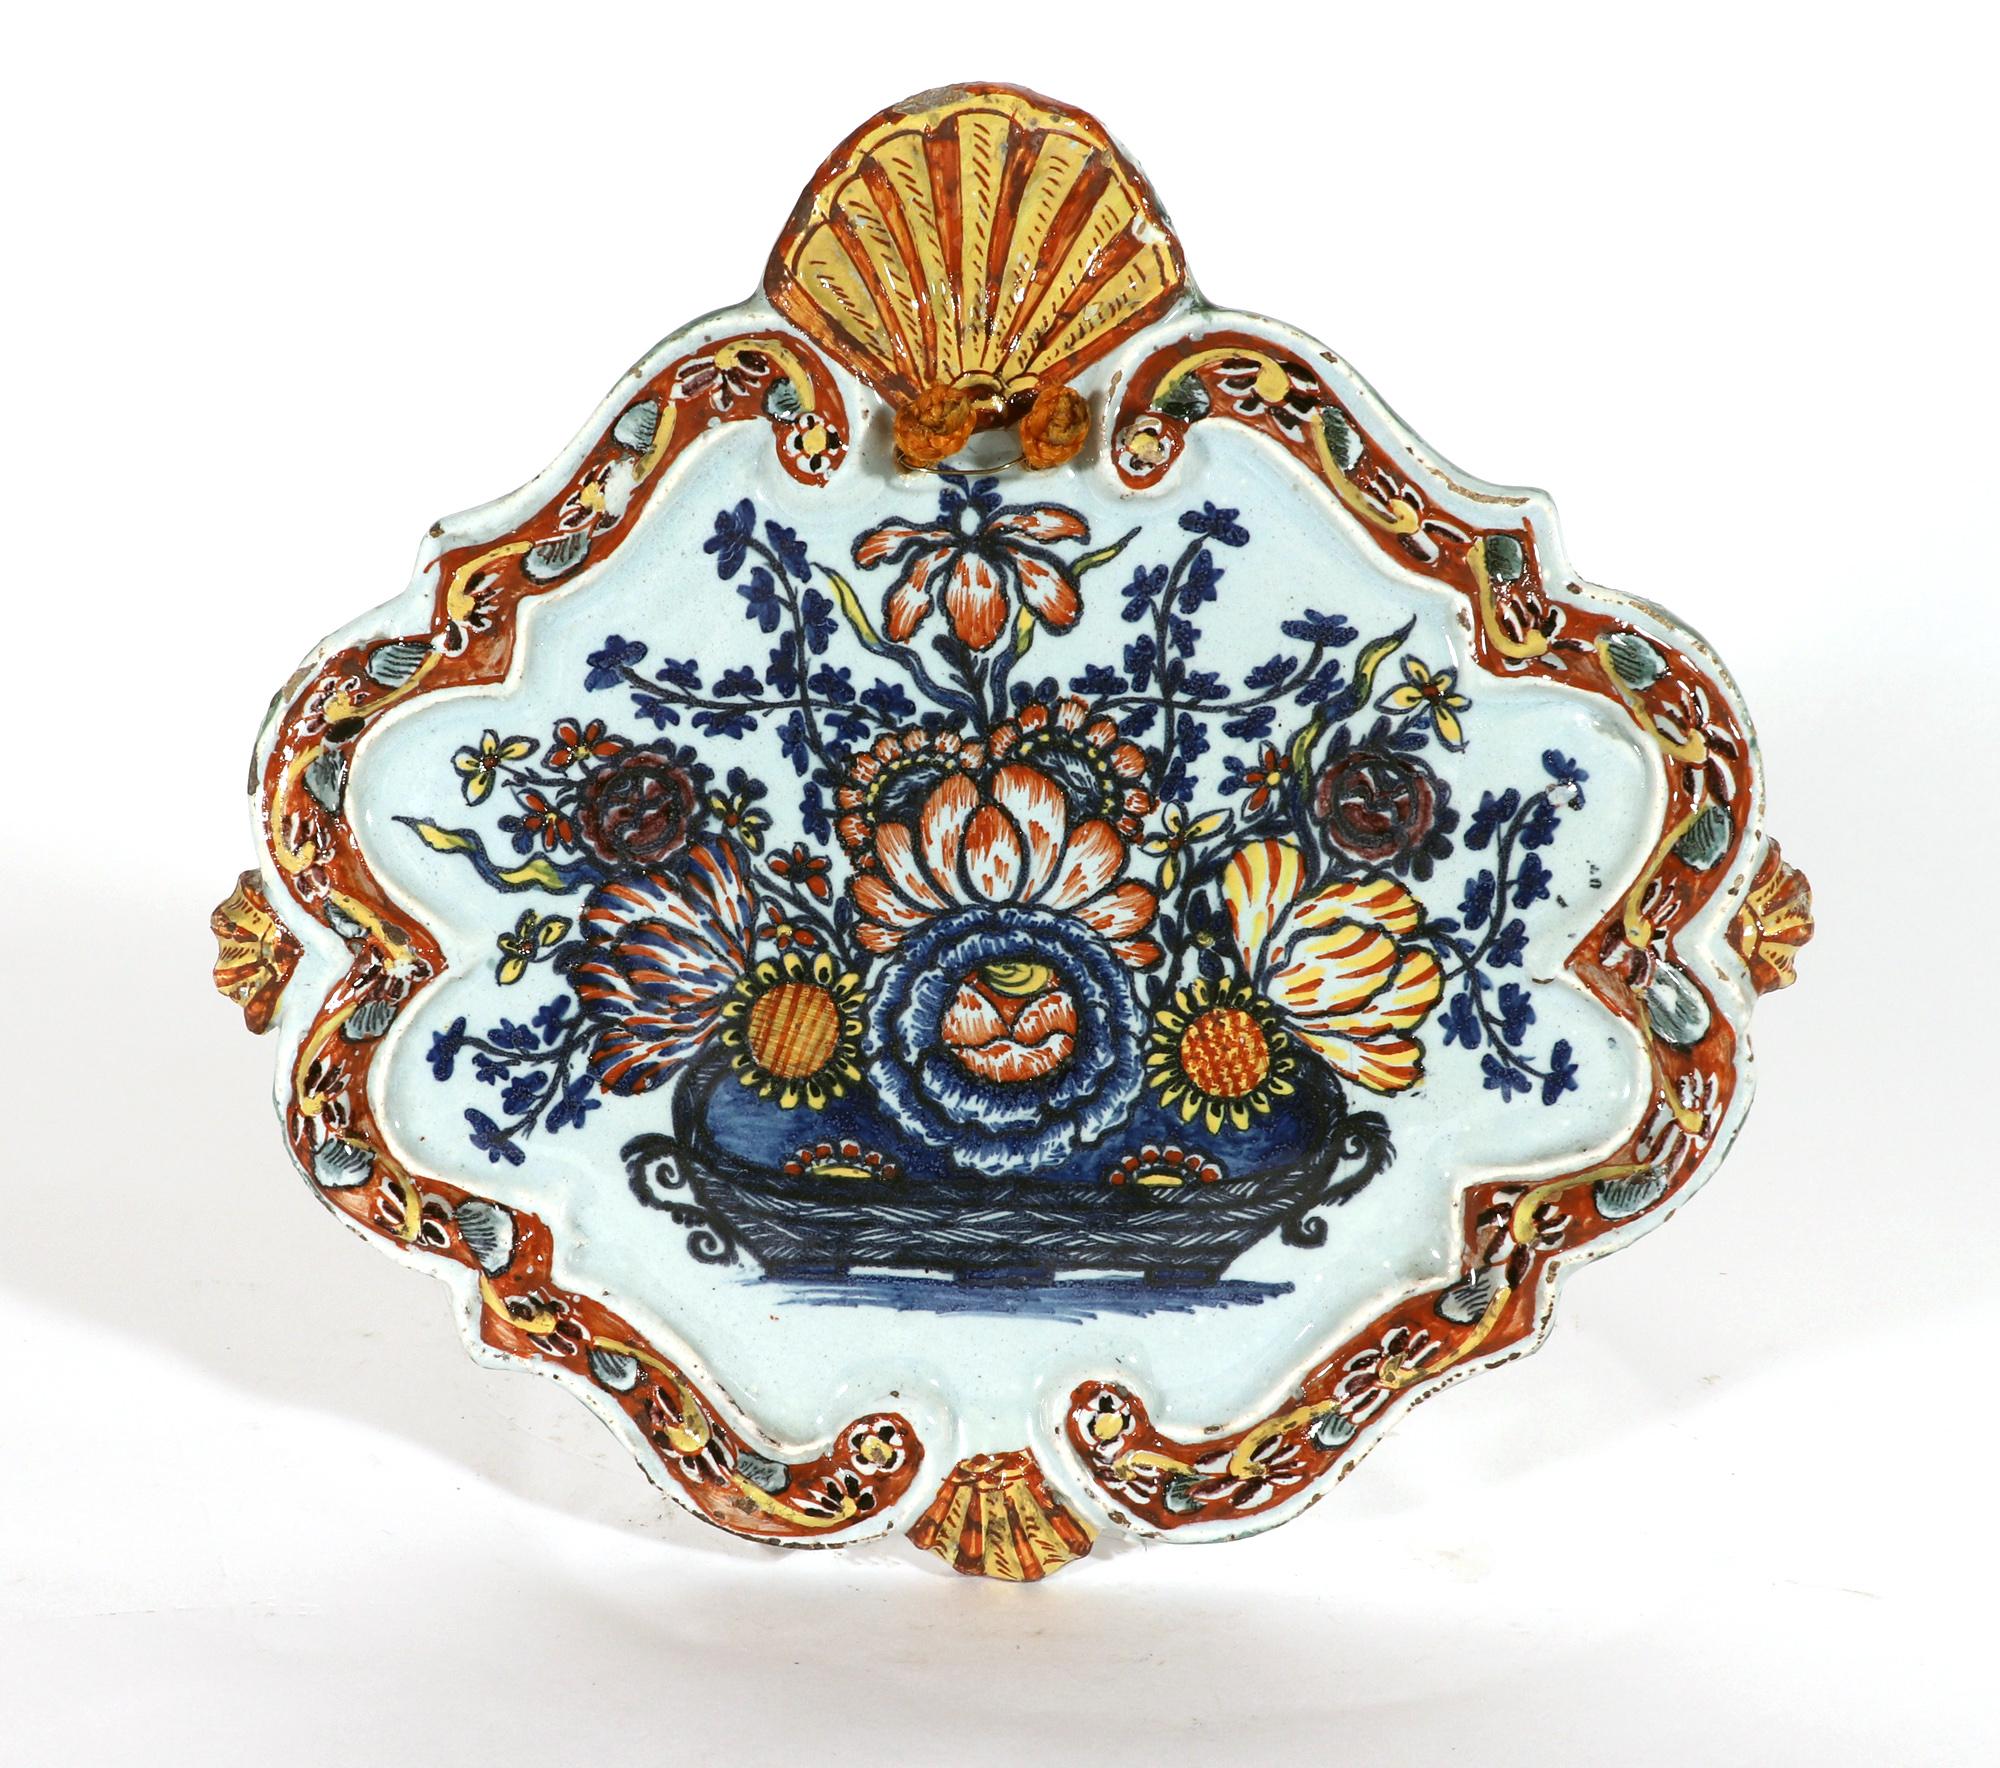 Dutch Delft Polychrome Shaped Plaques,
A Pair,
Mid-18th century

The shaped Dutch Delft plaques each depict an exuberant display of flowers in an oval handled jardiniere. The molded, raised rim with a band of red with a continuous floral vine in